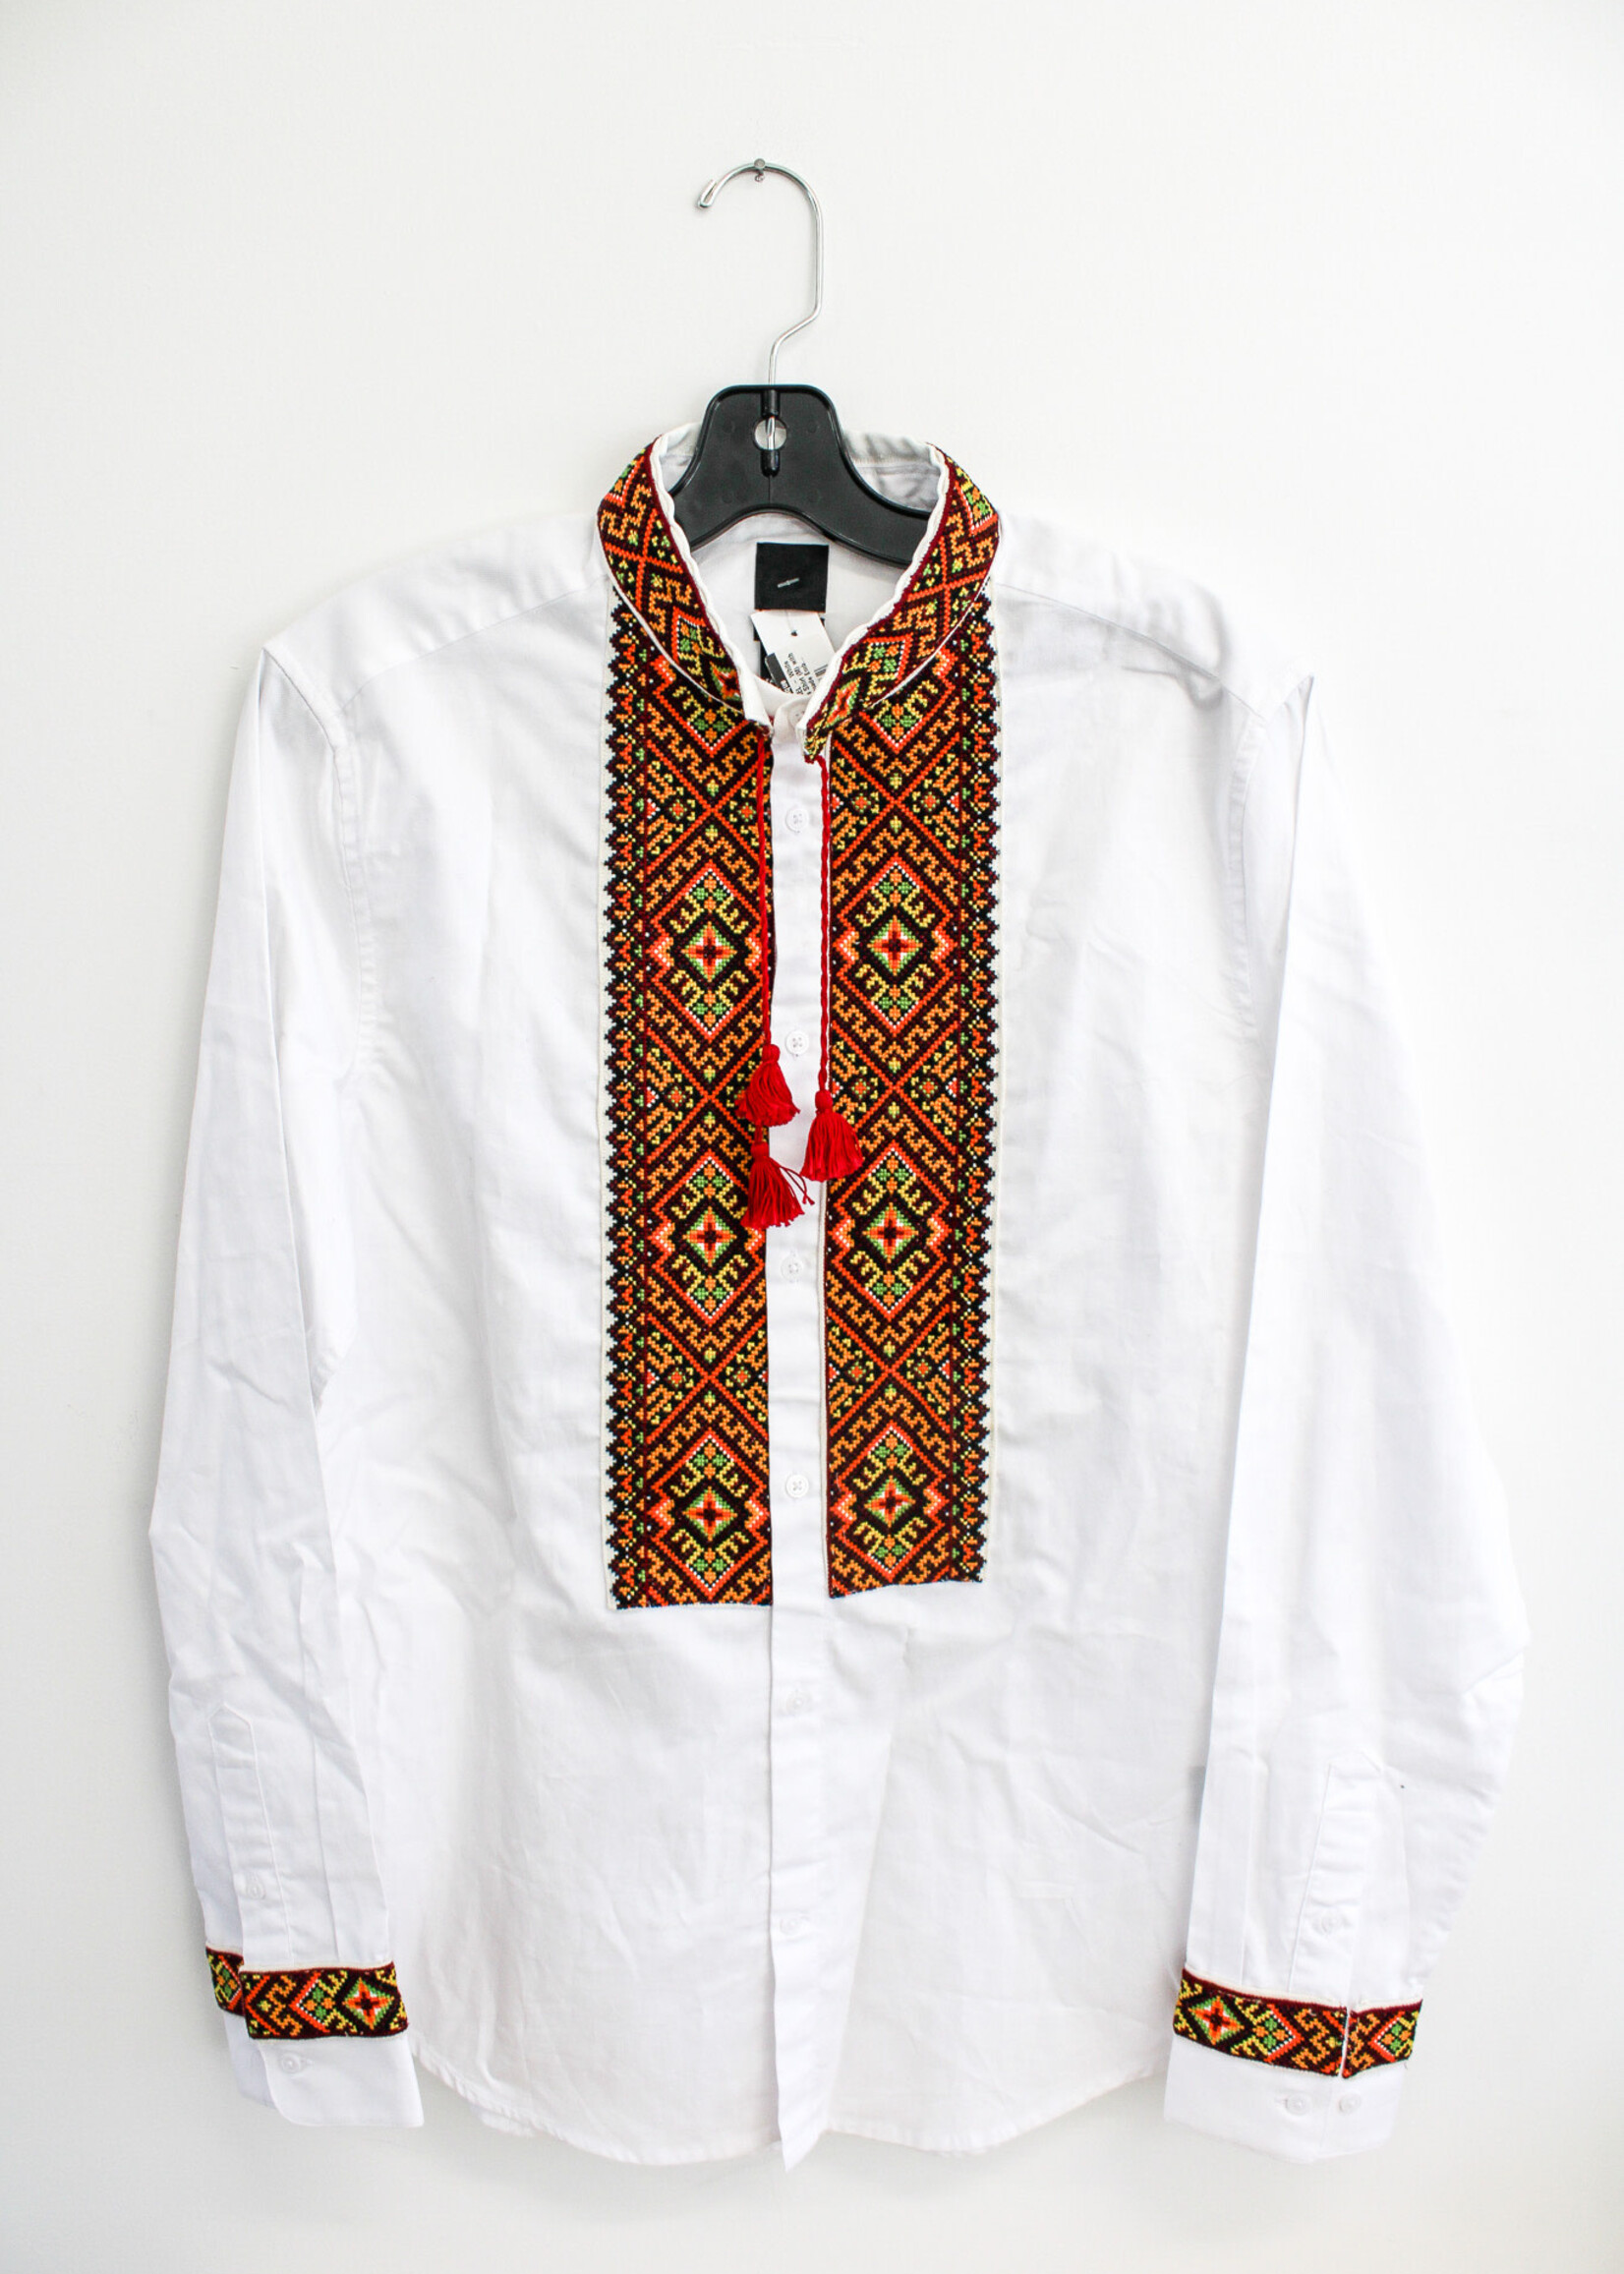 APPAREL - White men's Shirt (M) with Handmade Embroidery